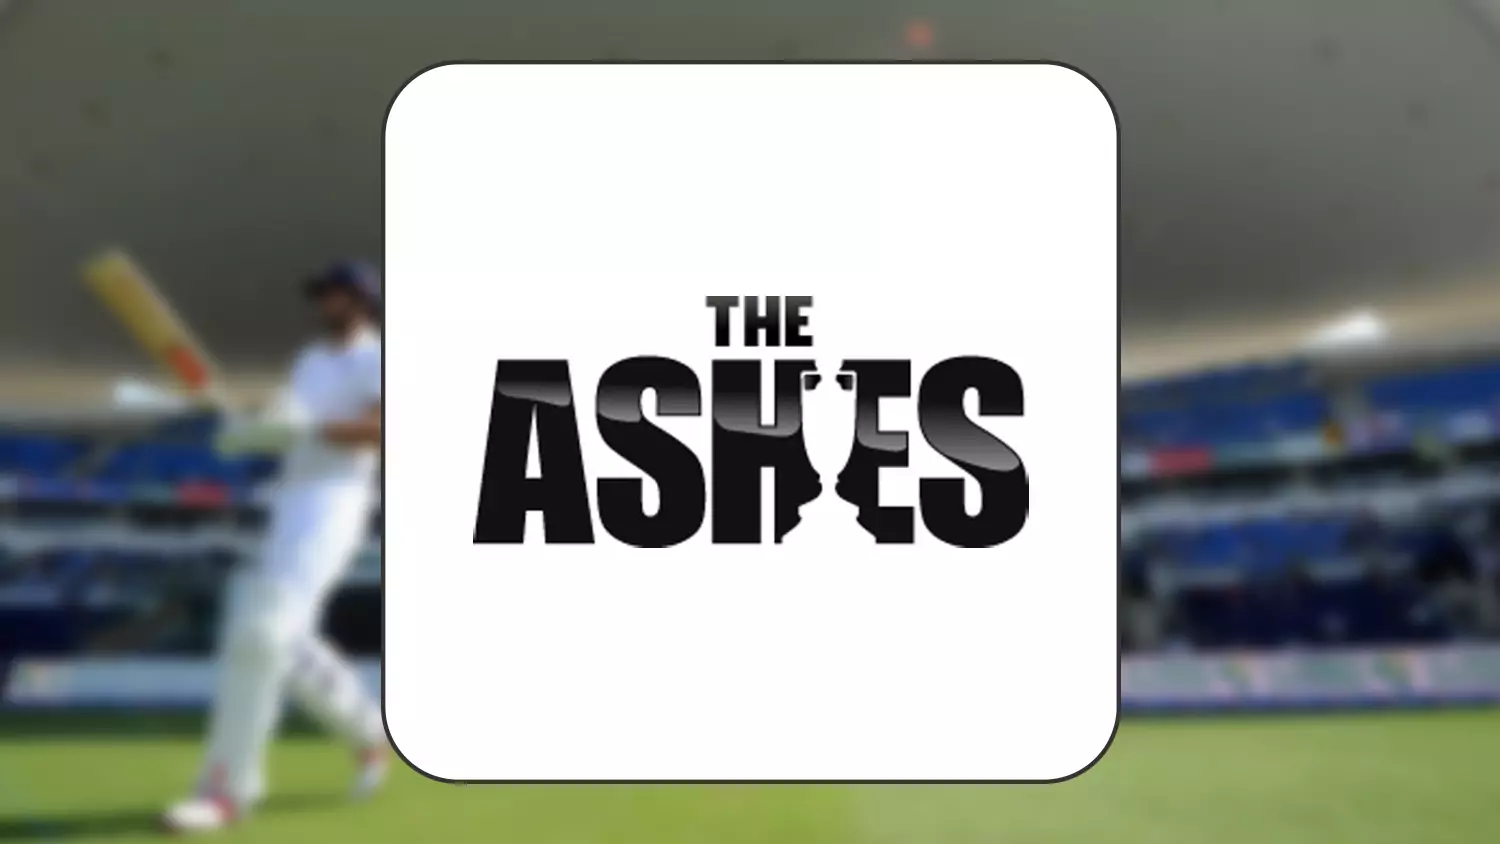 The Ashes is a cricket competition between teams of Britain and Australia.